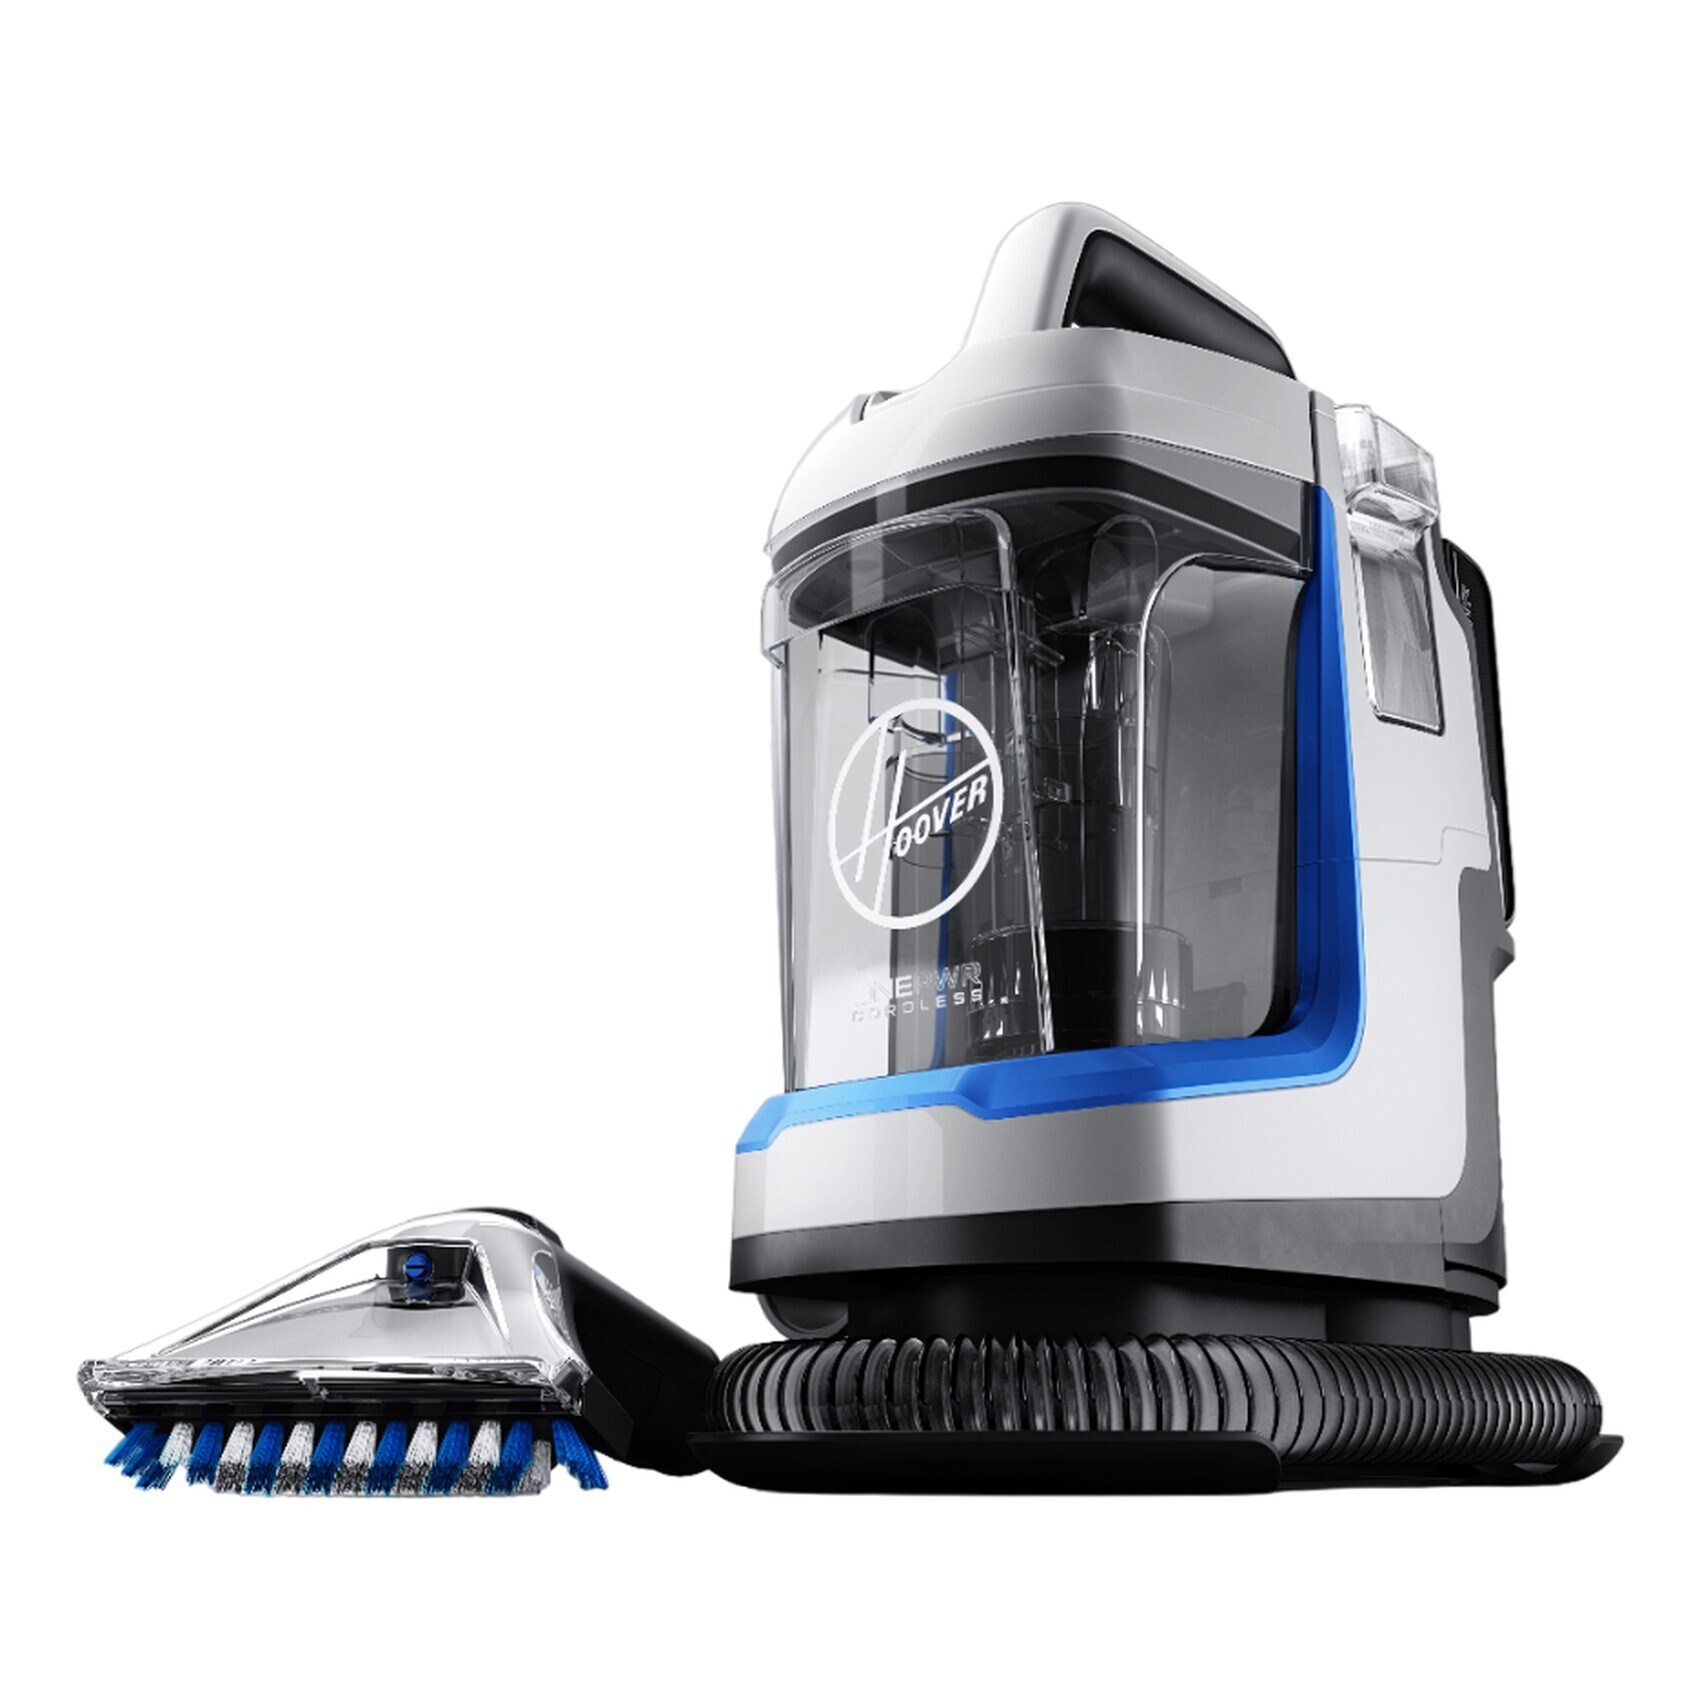 Hoover Spotless Spot Washer - Hoover UAE English Store View